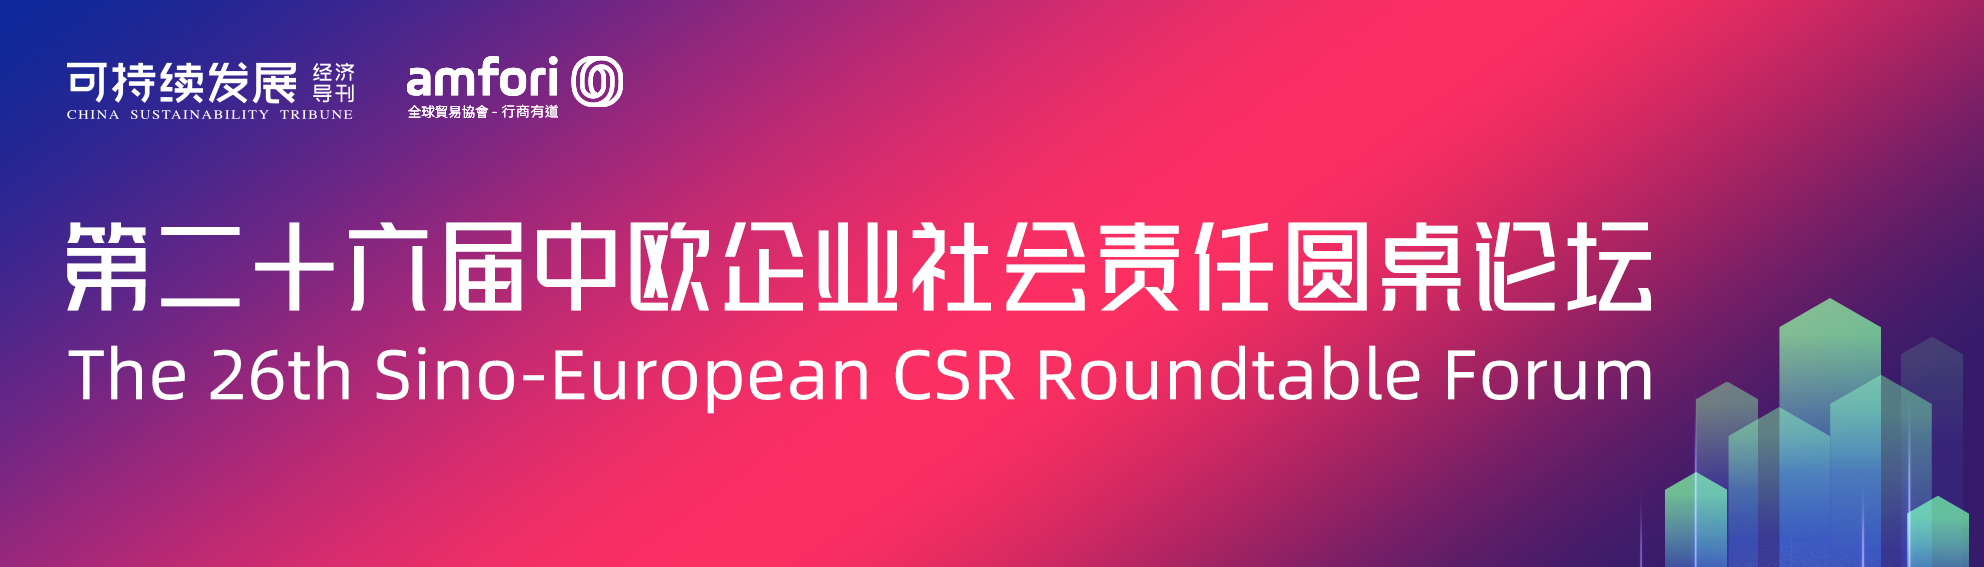 Reminder: The 25th Sino-European Roundtable Forum on July 21